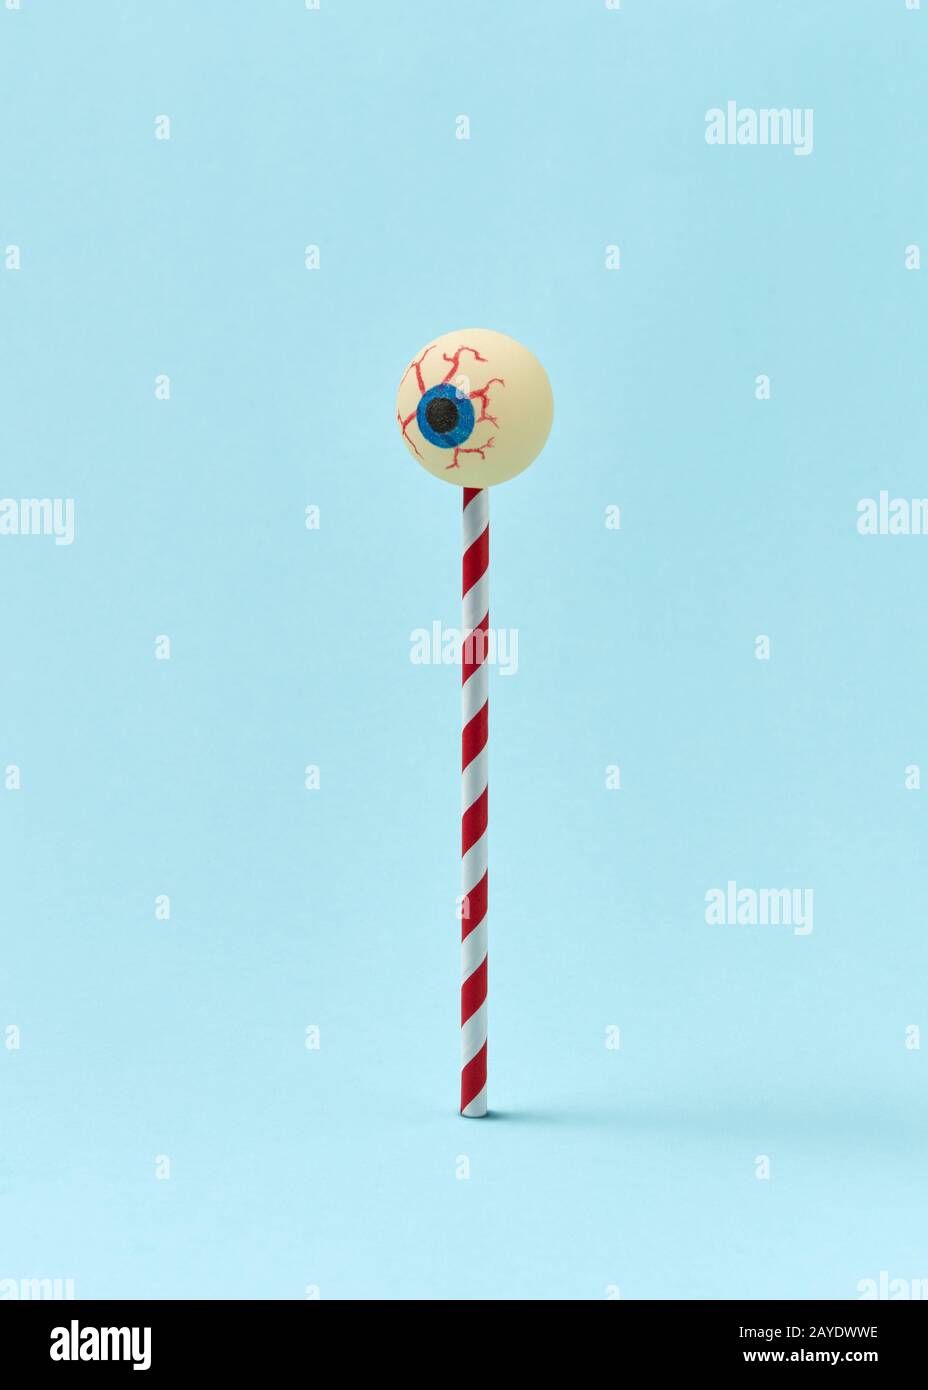 Human eyeball on a plastic straw as a candy. Stock Photo